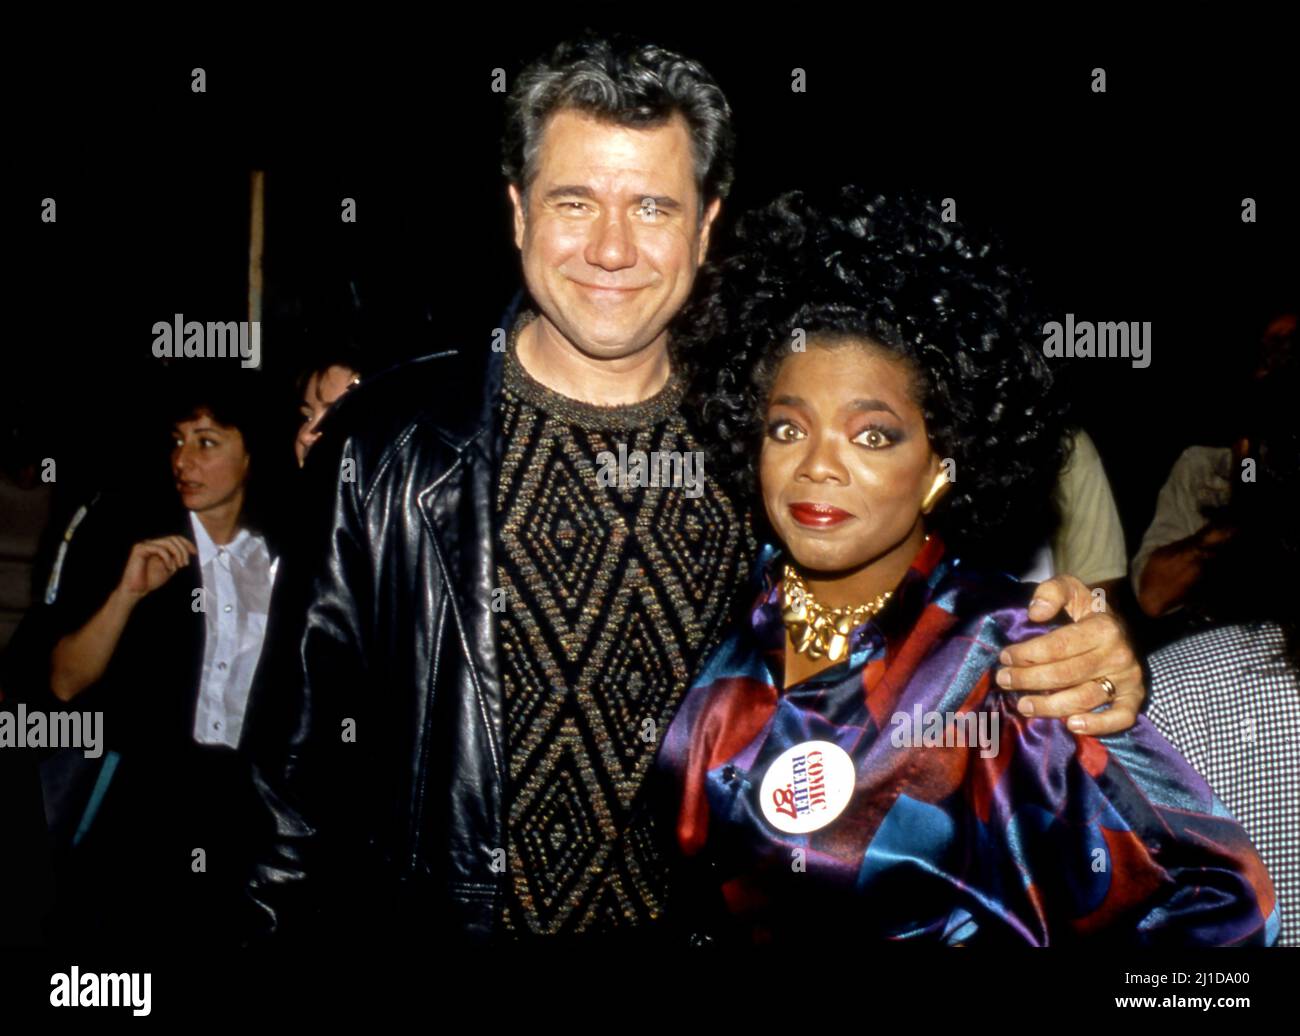 Oprah Winfrey and John Laroquette at an event related to the Comic Relief benefit for homelessness in Los Angeles, CA 1987 Stock Photo